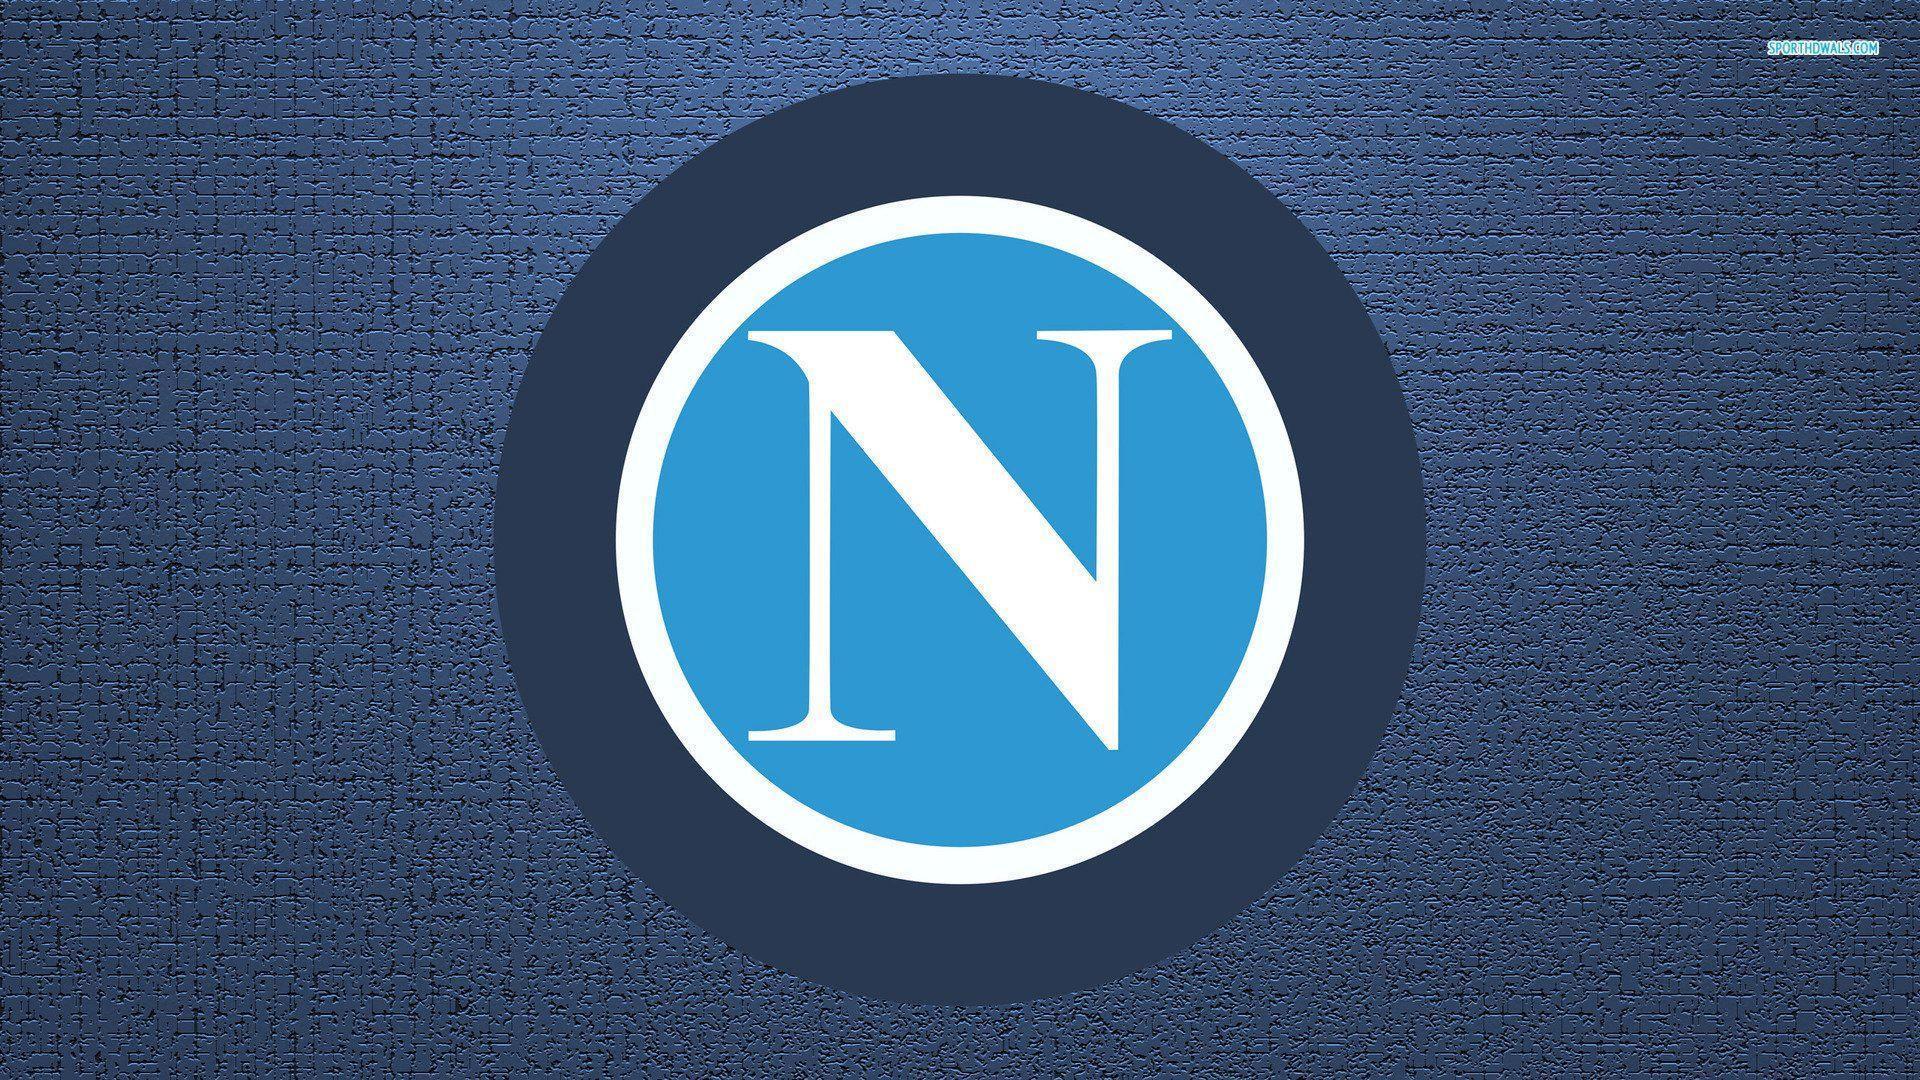 SSC Napoli Wallpapers